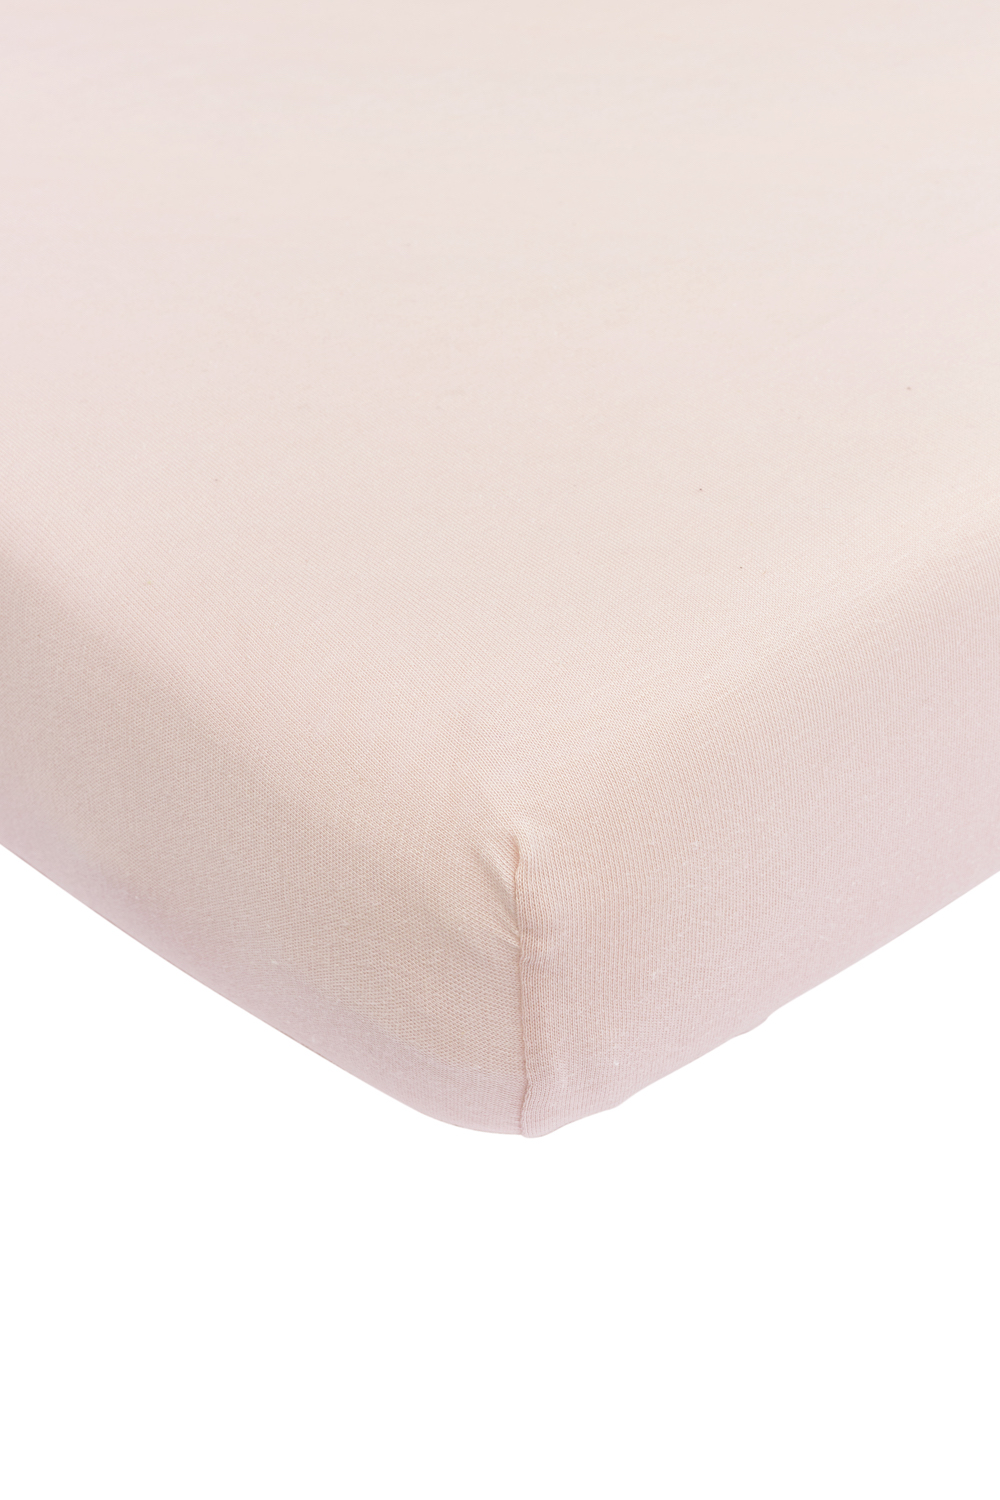 wiel Analist boog Order the Meyco Jersey Fitted Sheet Junior 70x140/150 cm. - Baby Plus